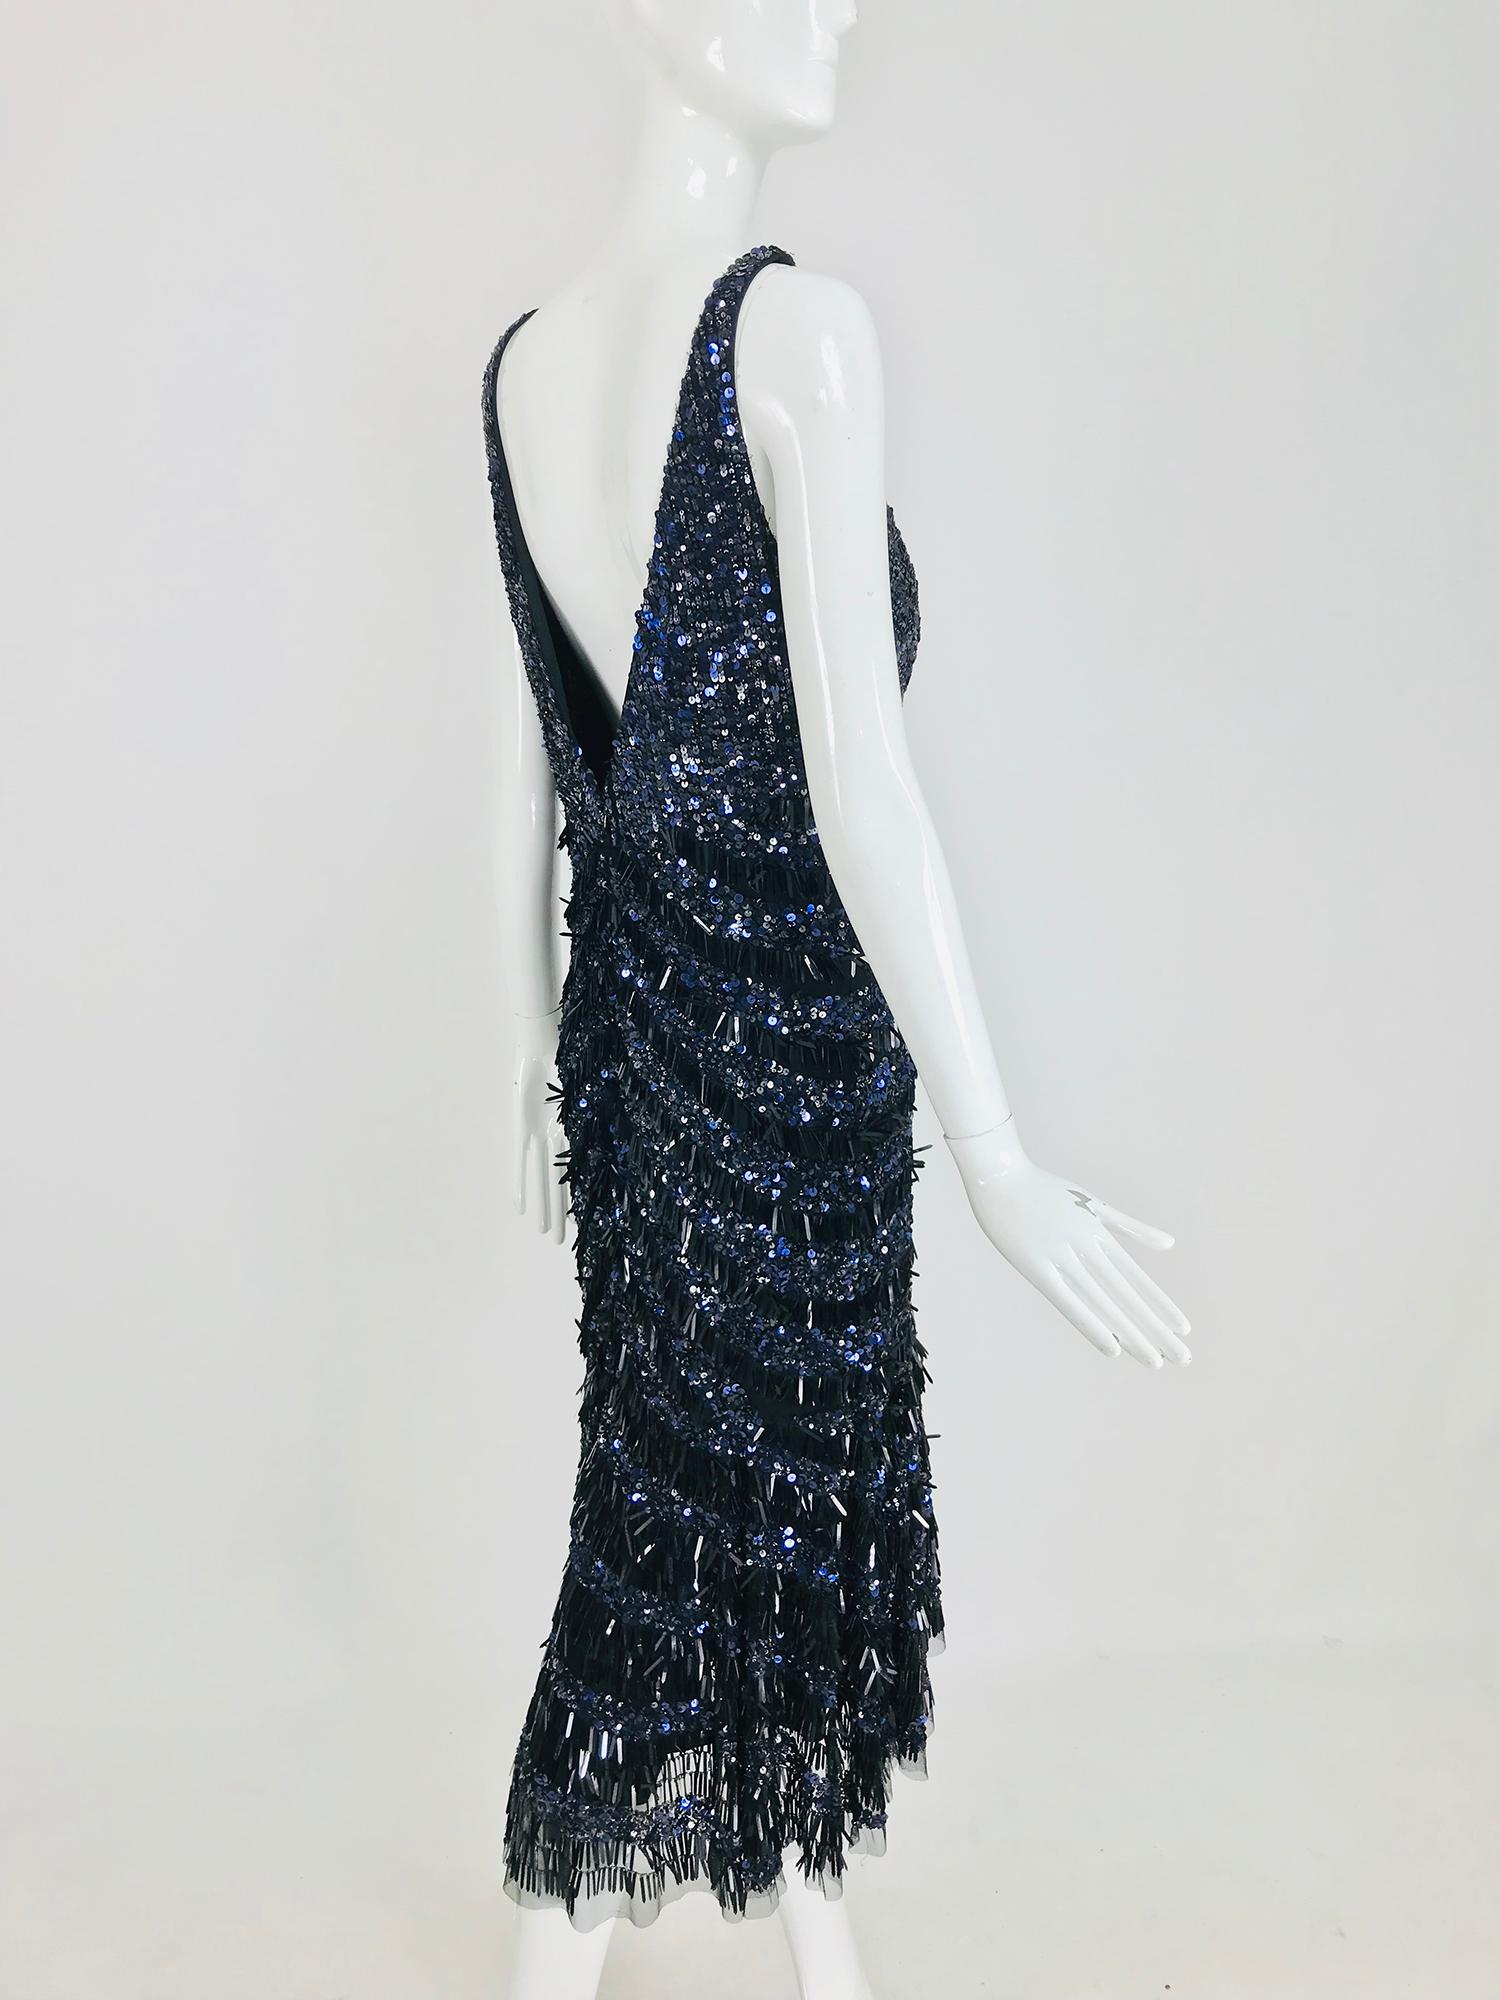 Theia Sequin Evening Cocktail Dress in Black and Blue 12 2